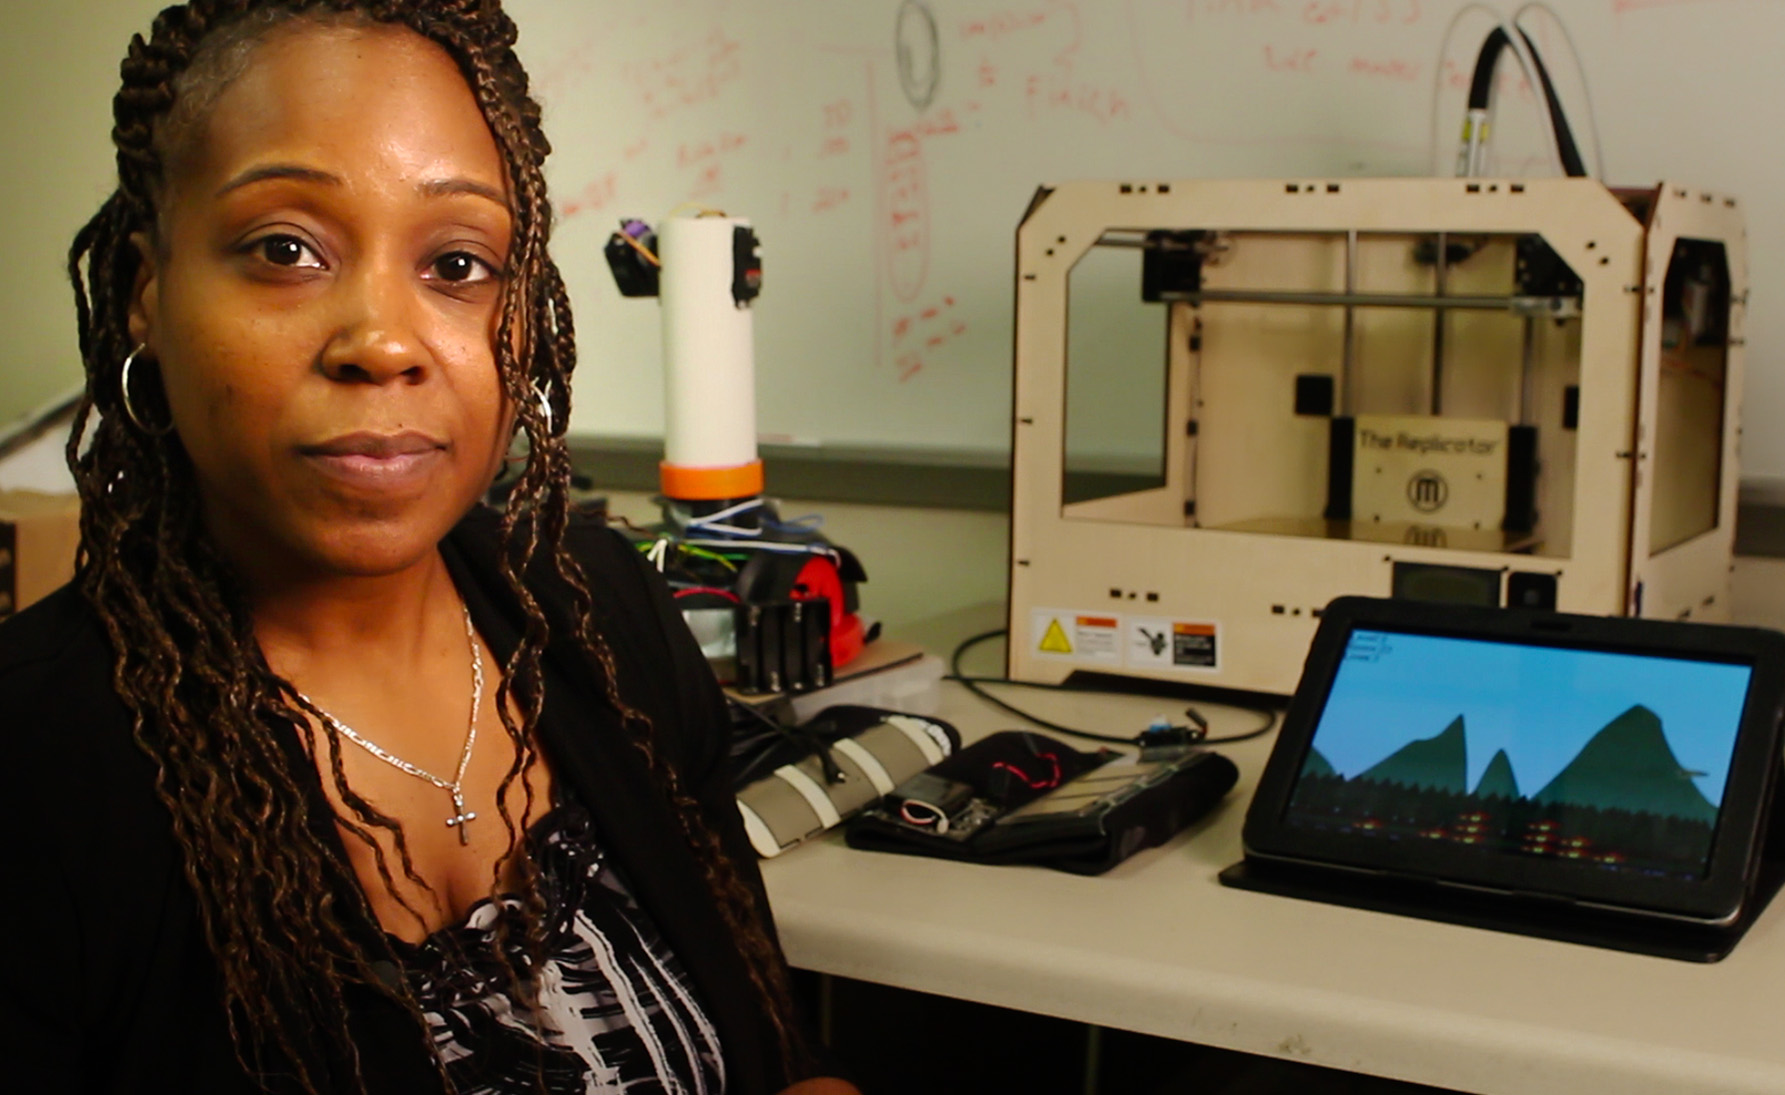 Georgia Tech Professor Ayanna Howard has launched a company to commercialize a system that connects interface devices used by children with disabilities to tablet computers. The company resulted from the NSF's I-Corps program. (Credit: Maxwell Guberman)